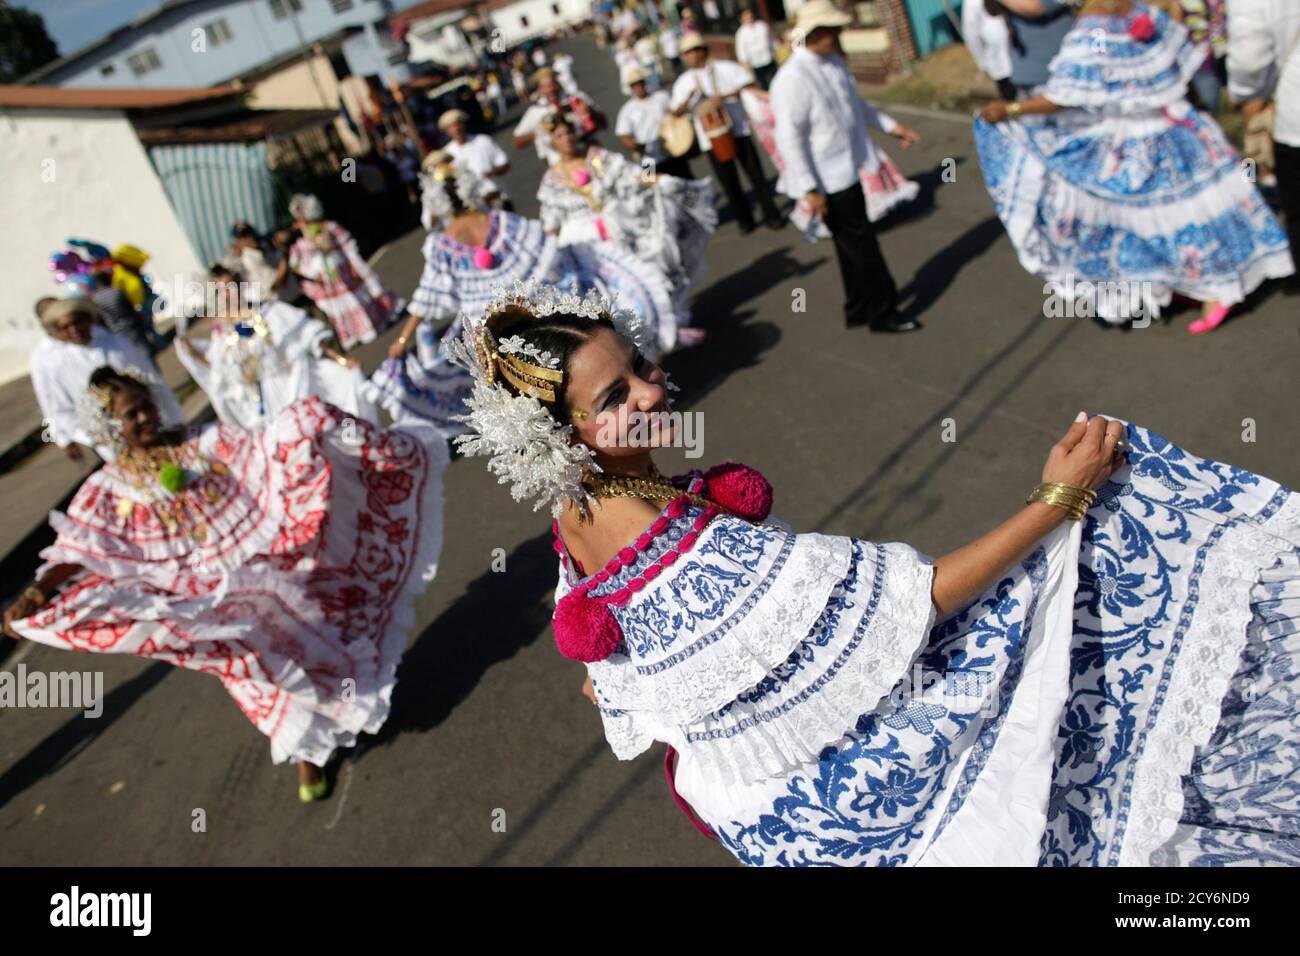 Women are seen wearing traditional clothing known as "Pollera" as they take  part in the annual Thousand Polleras parade in Las Tablas, in the province  of Los Santos, January 12, 2013. According